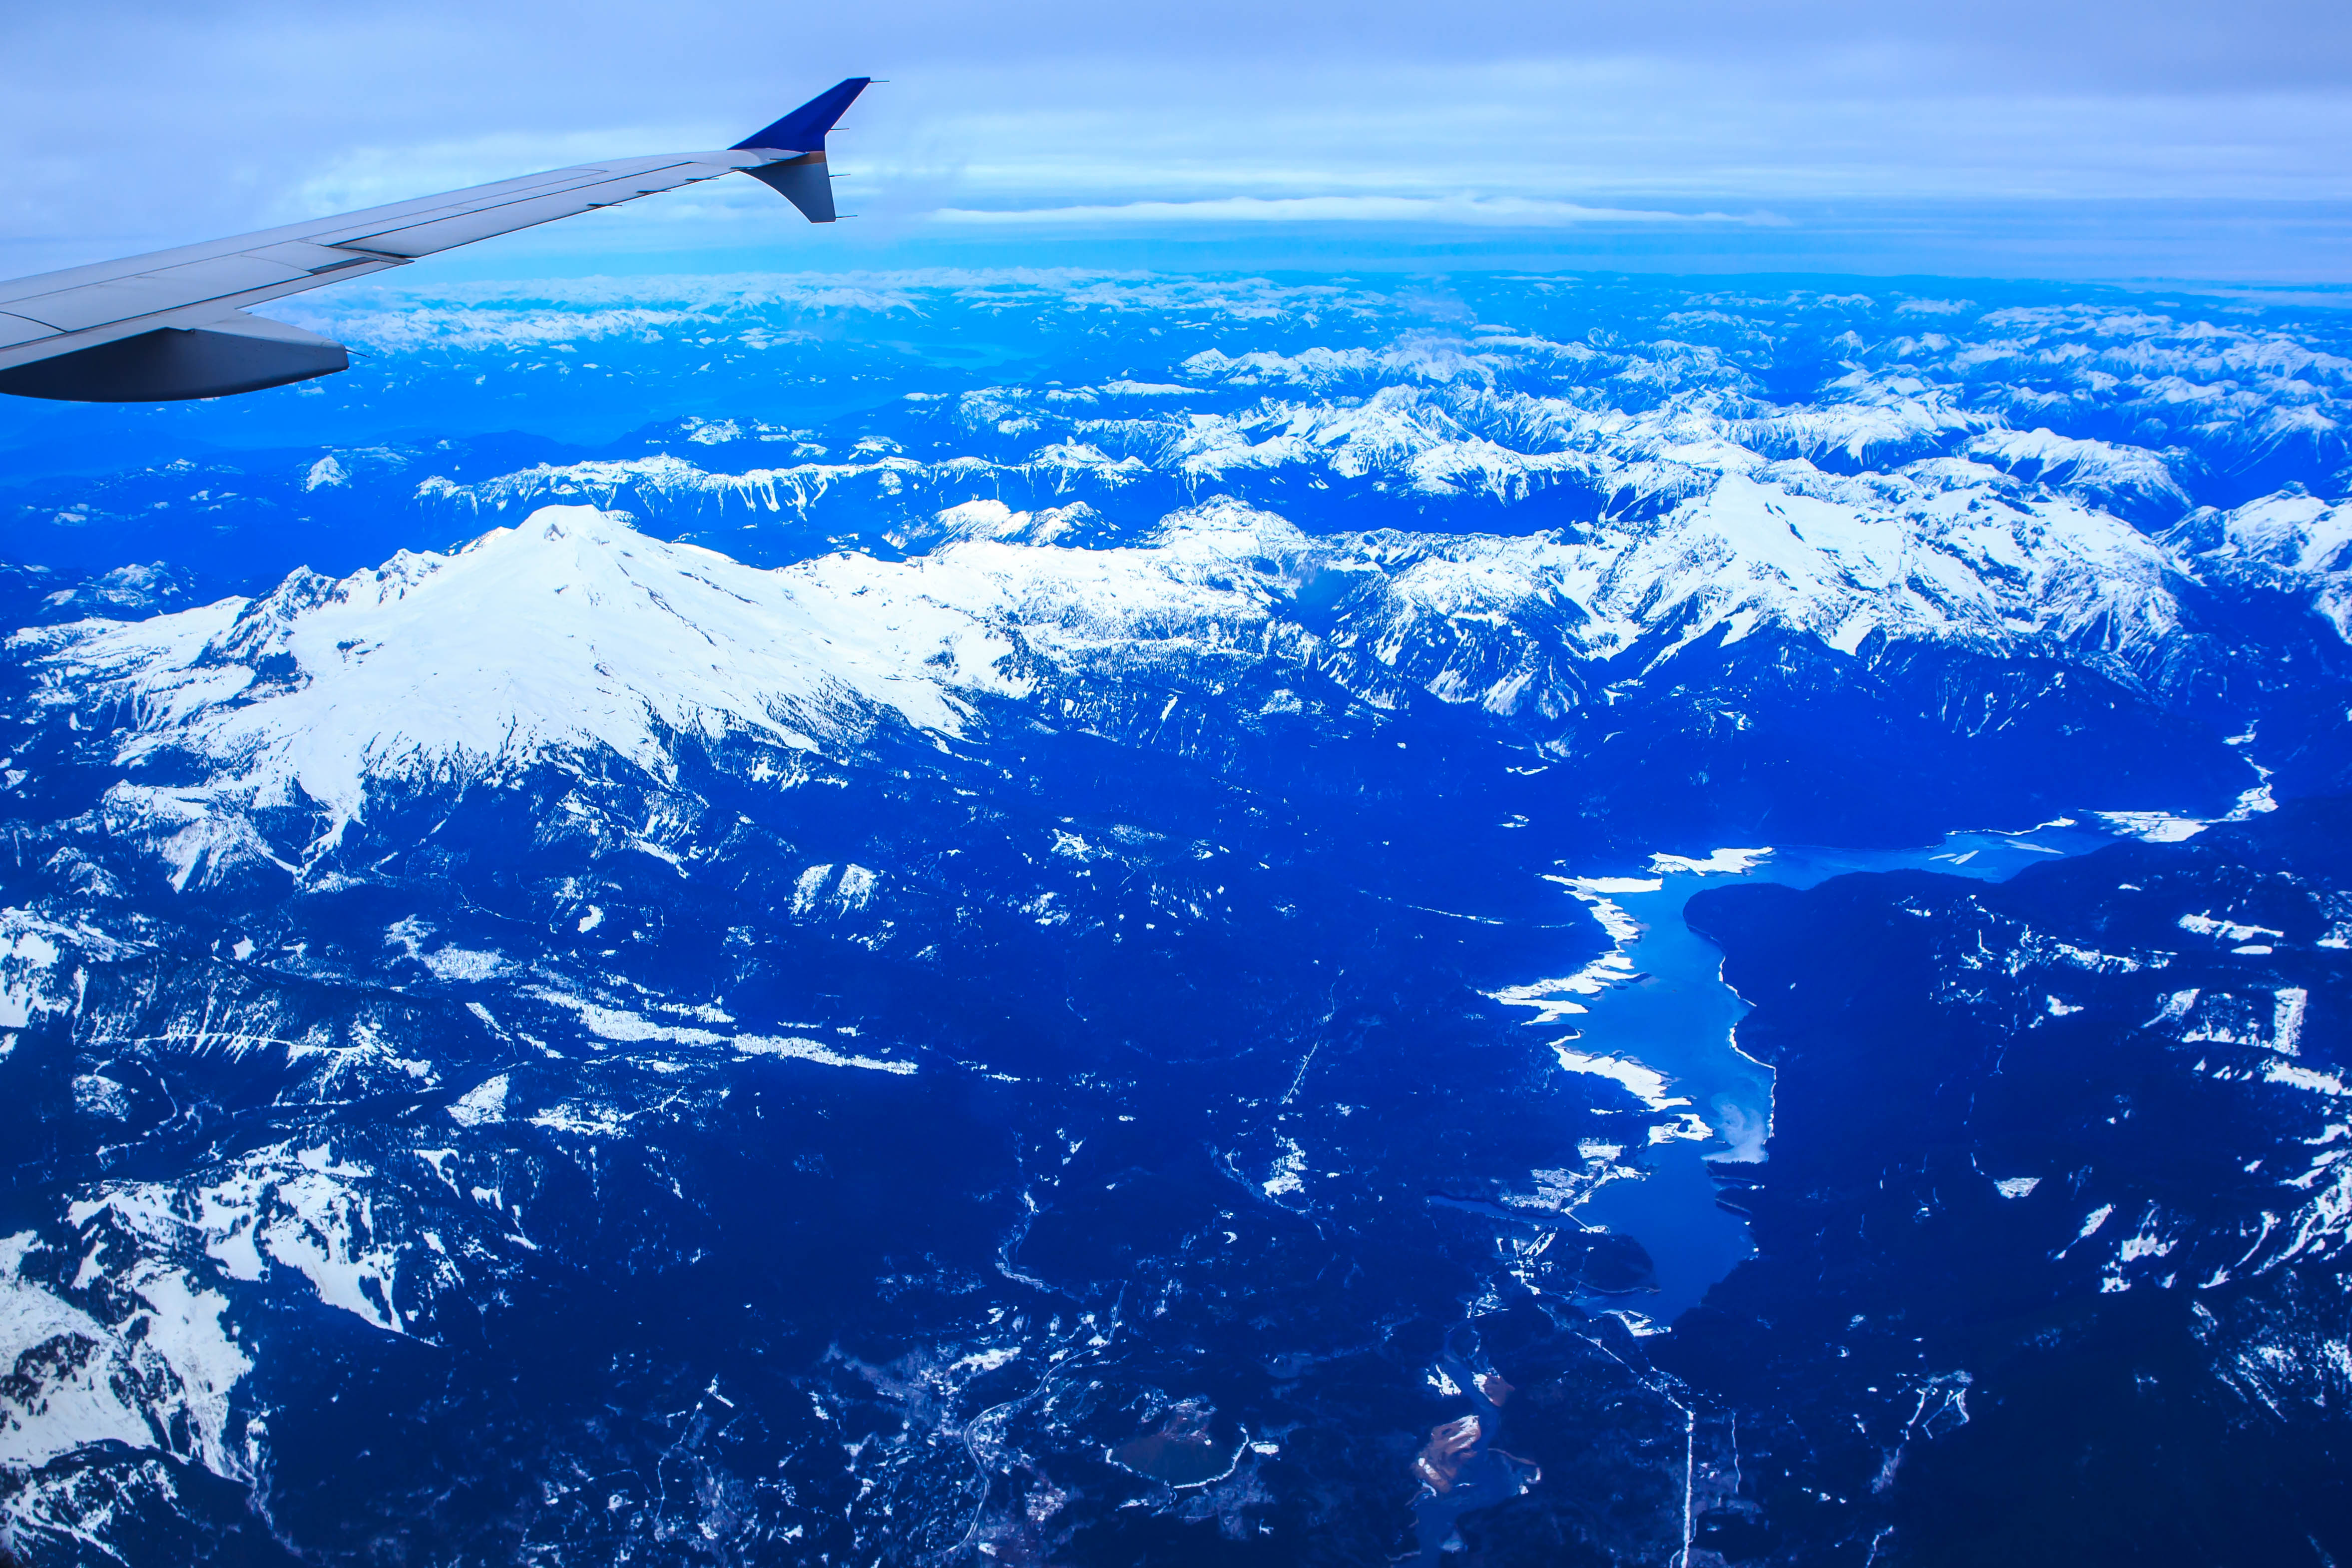 nature, mountains, usa, vertex, united states, tops, washington, airplane wing, wing of the plane